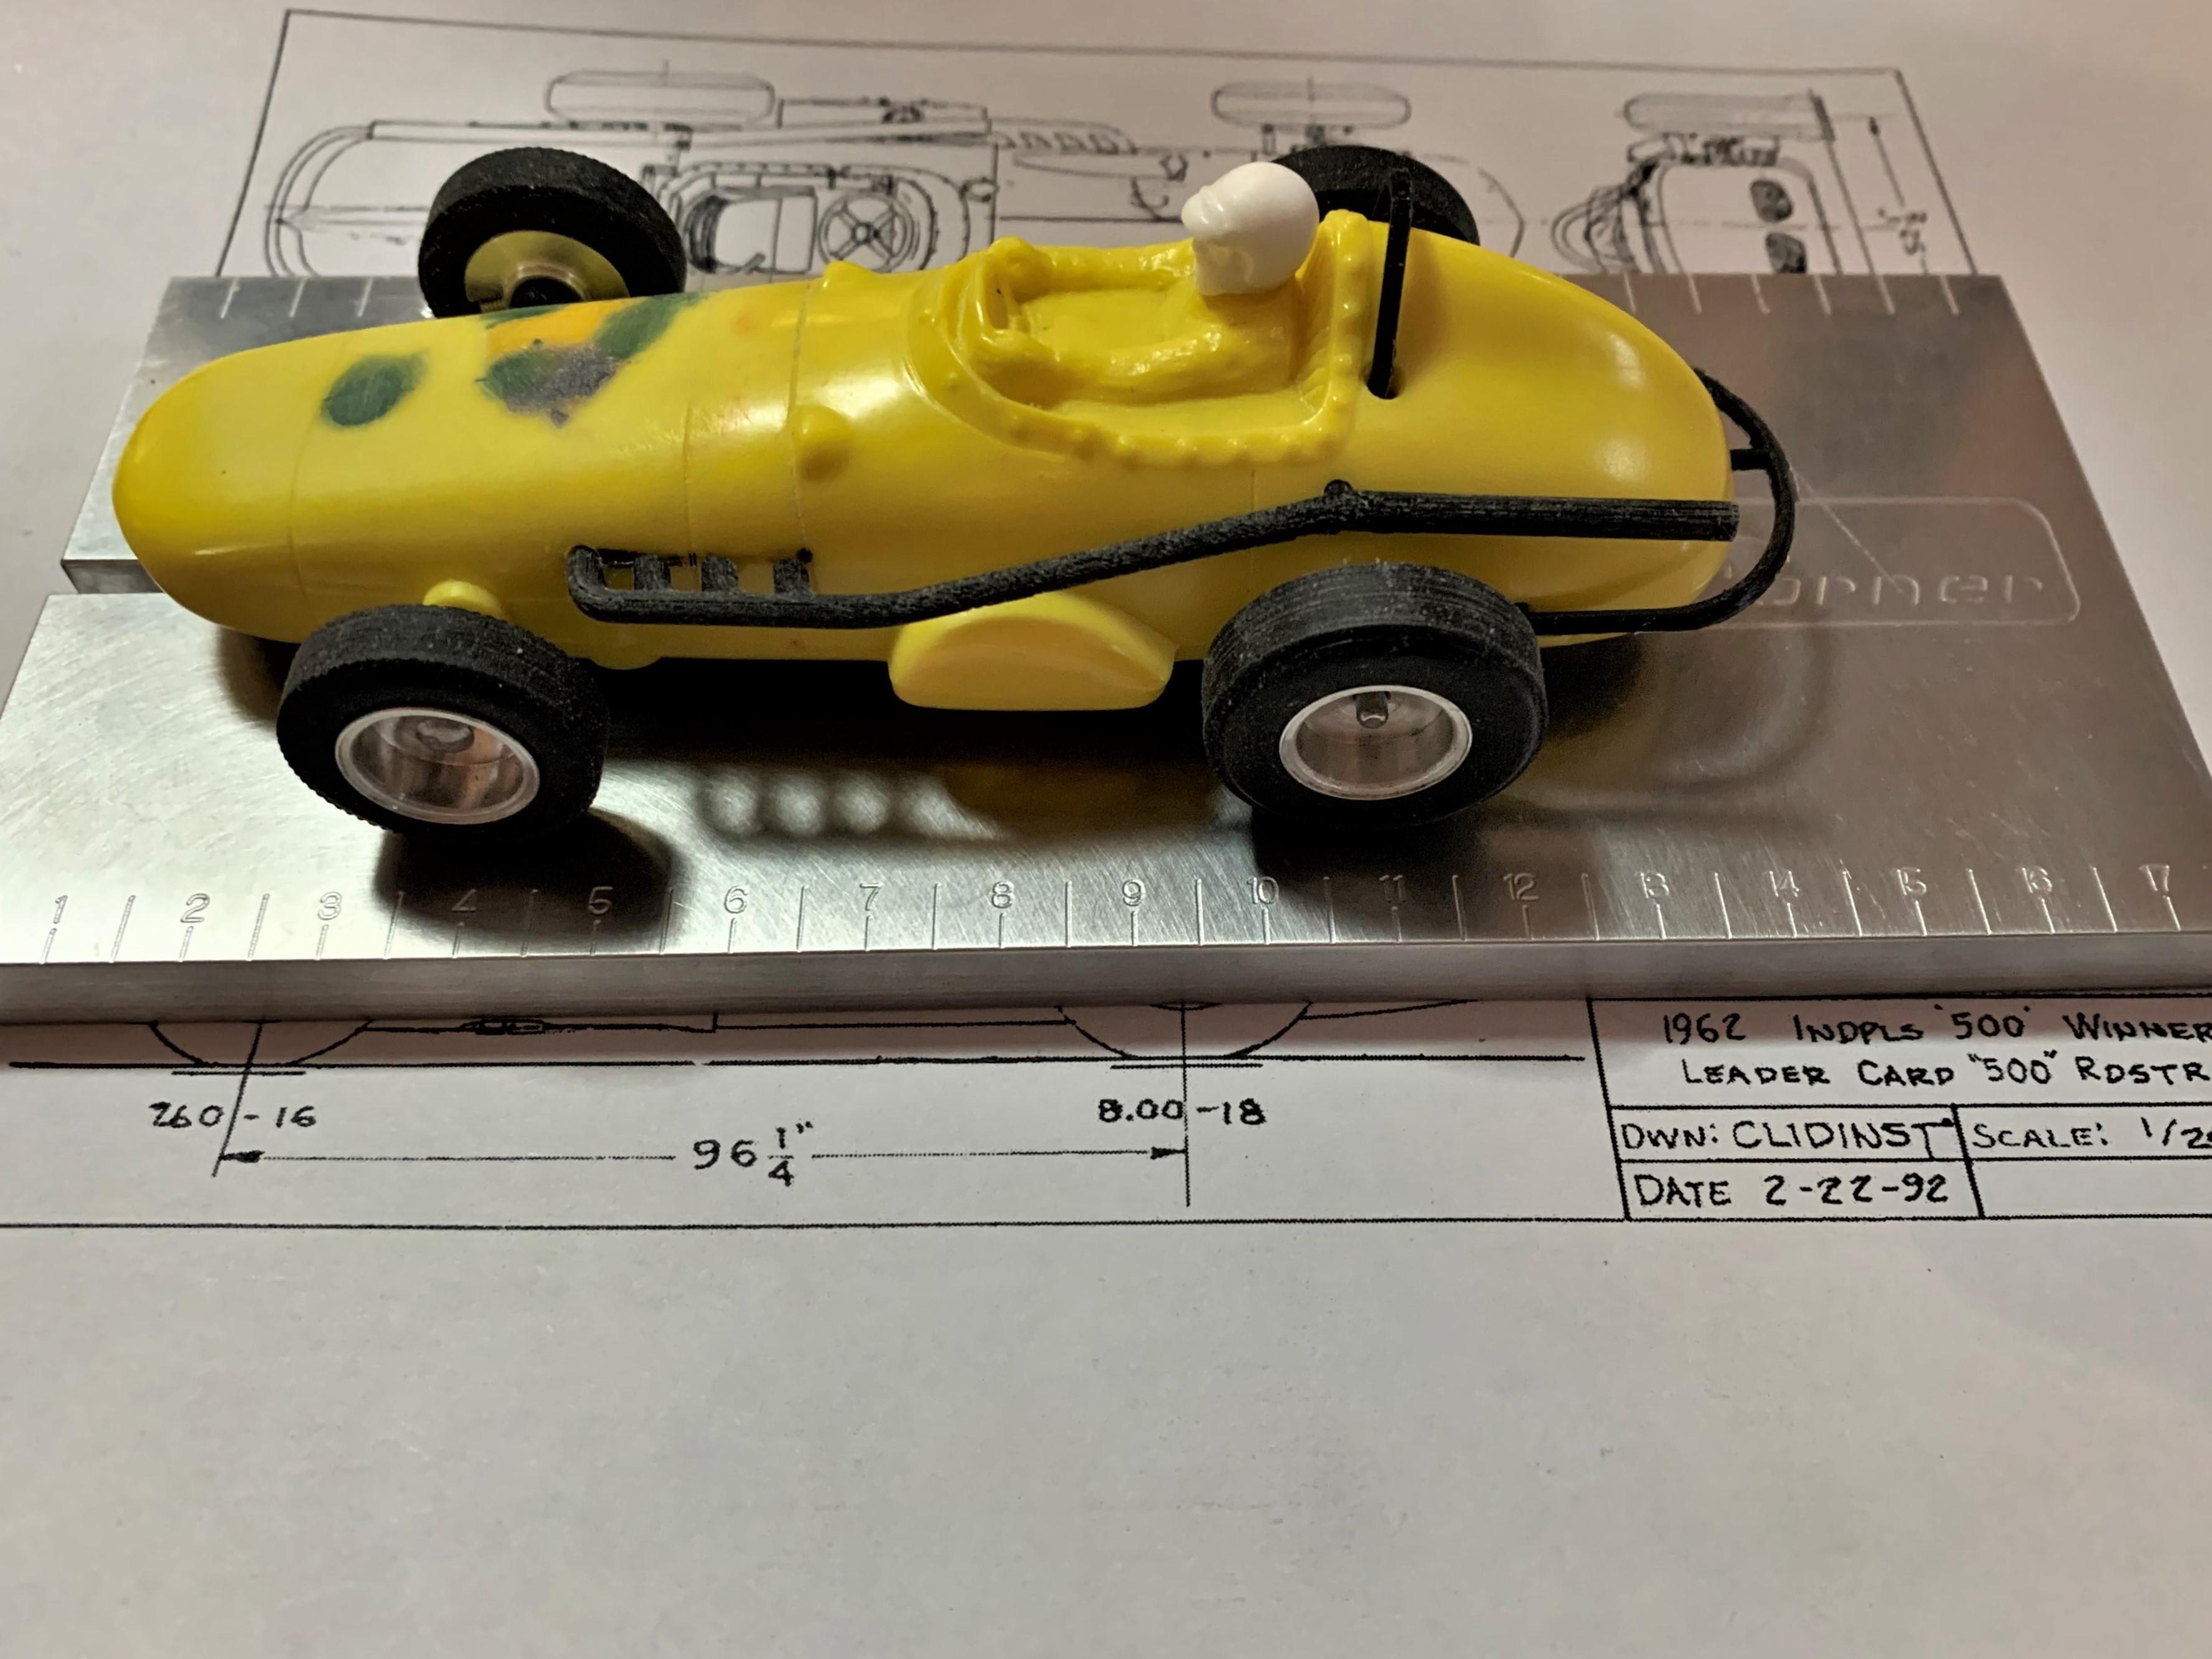 Eldon Roadster with 3D printed parts